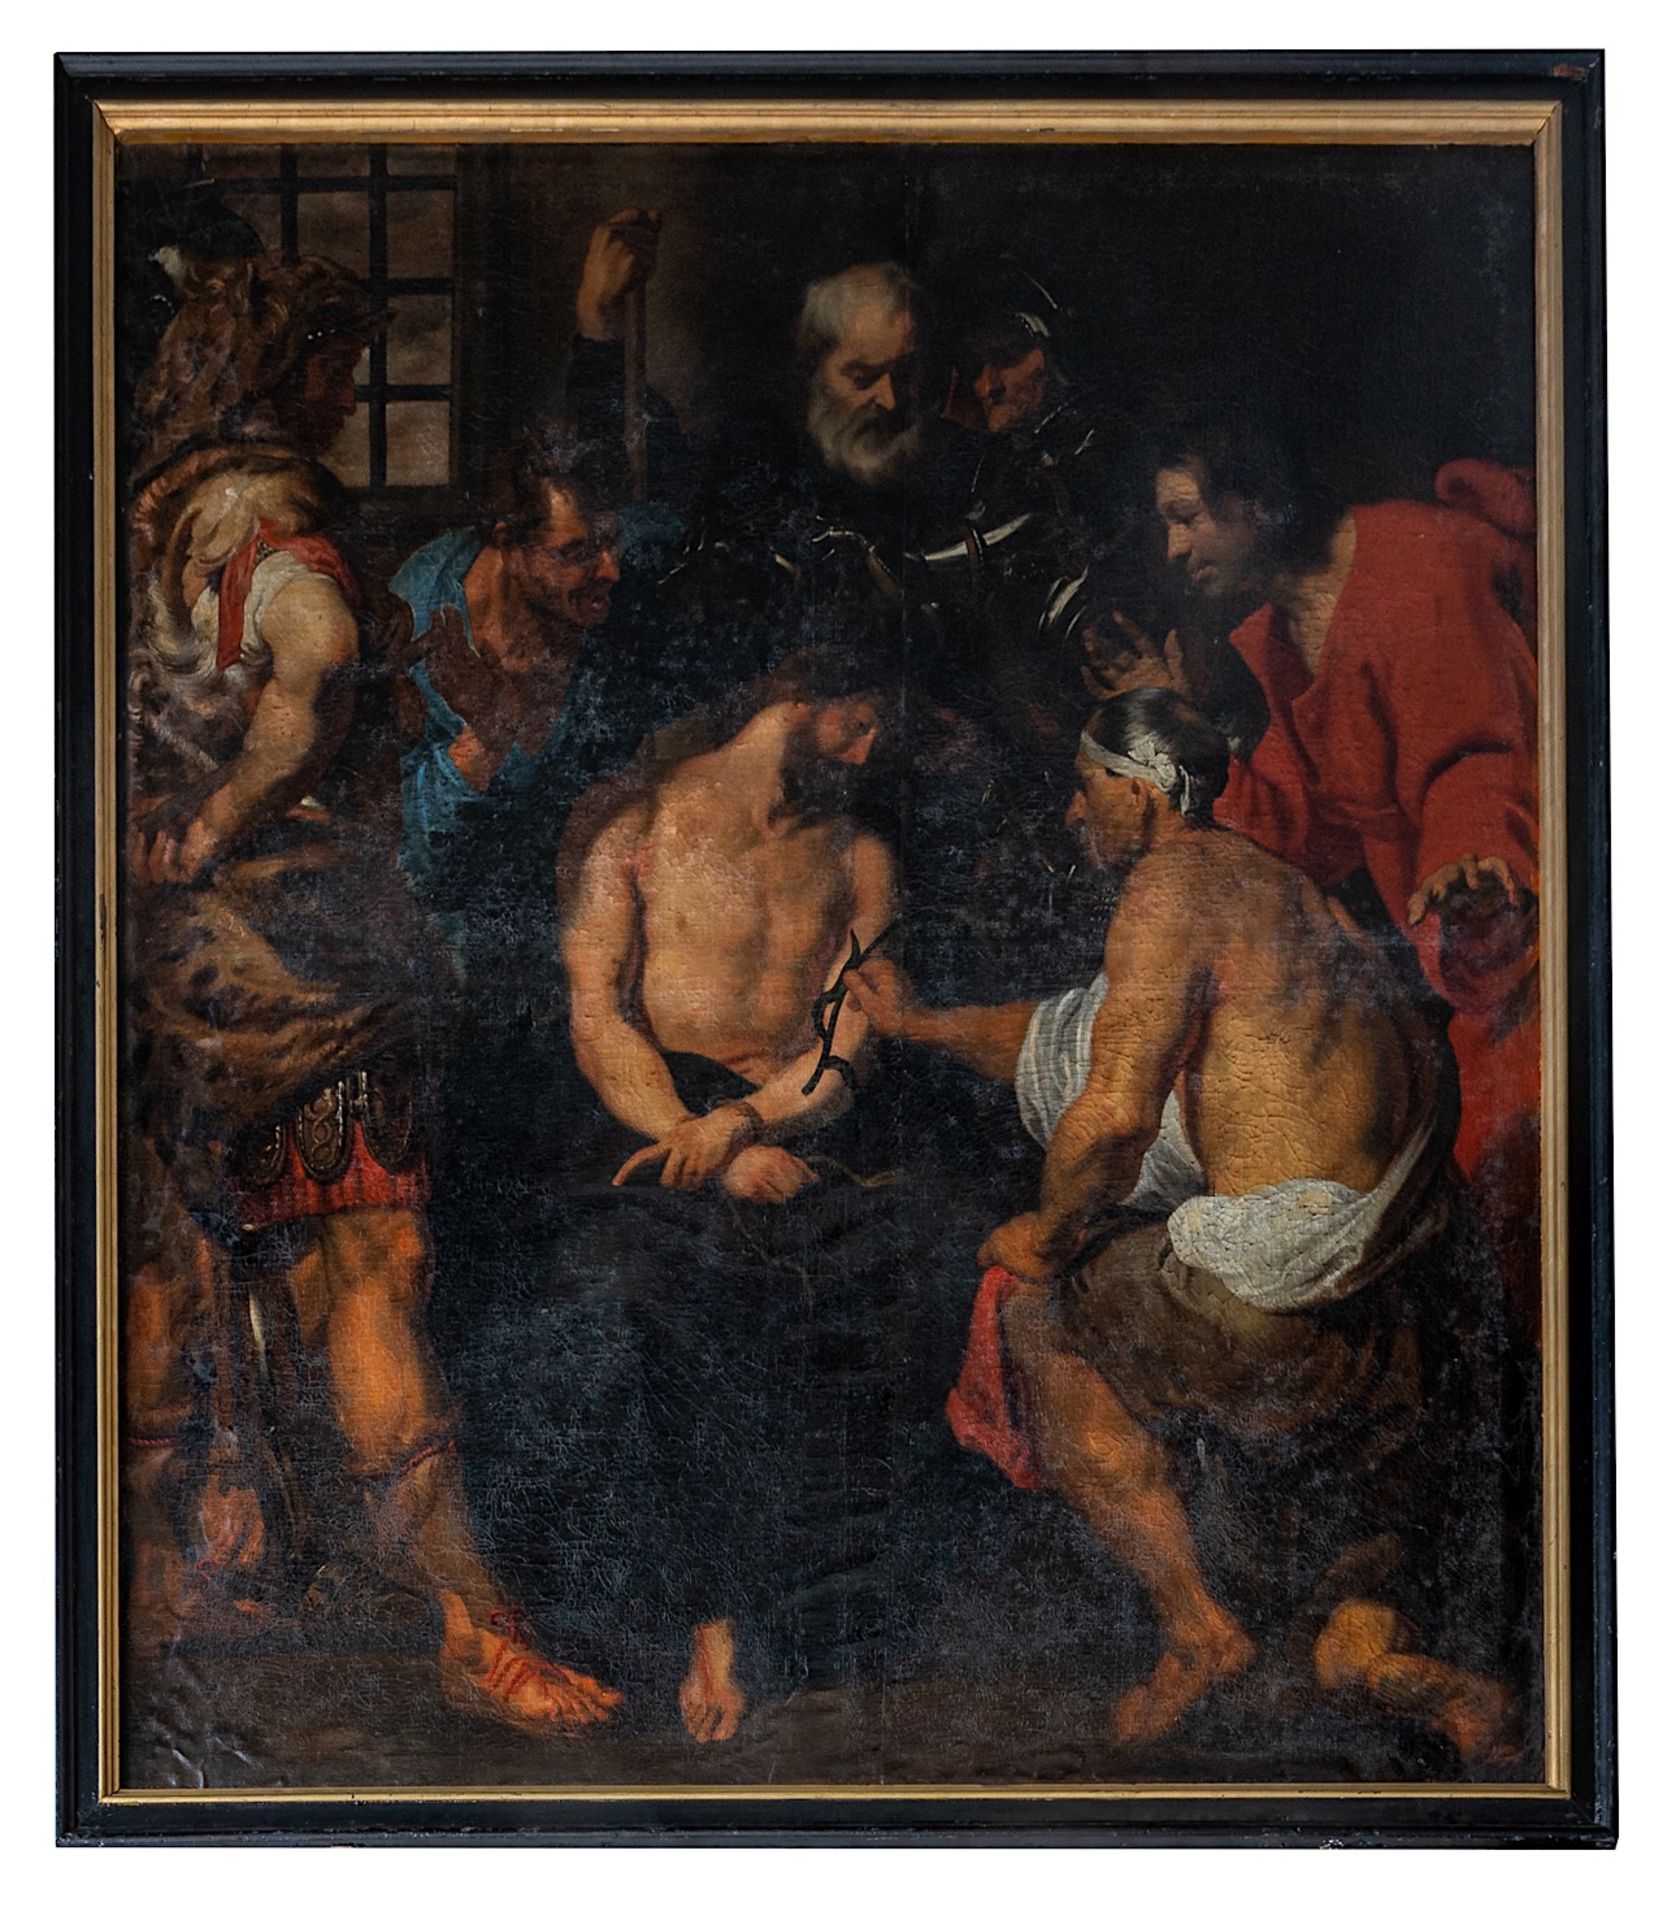 After Anthony van Dyck (1599-1641), 'Christ Crowned with Thorns', 17thC, oil on canvas 225 x 195 cm. - Image 2 of 3